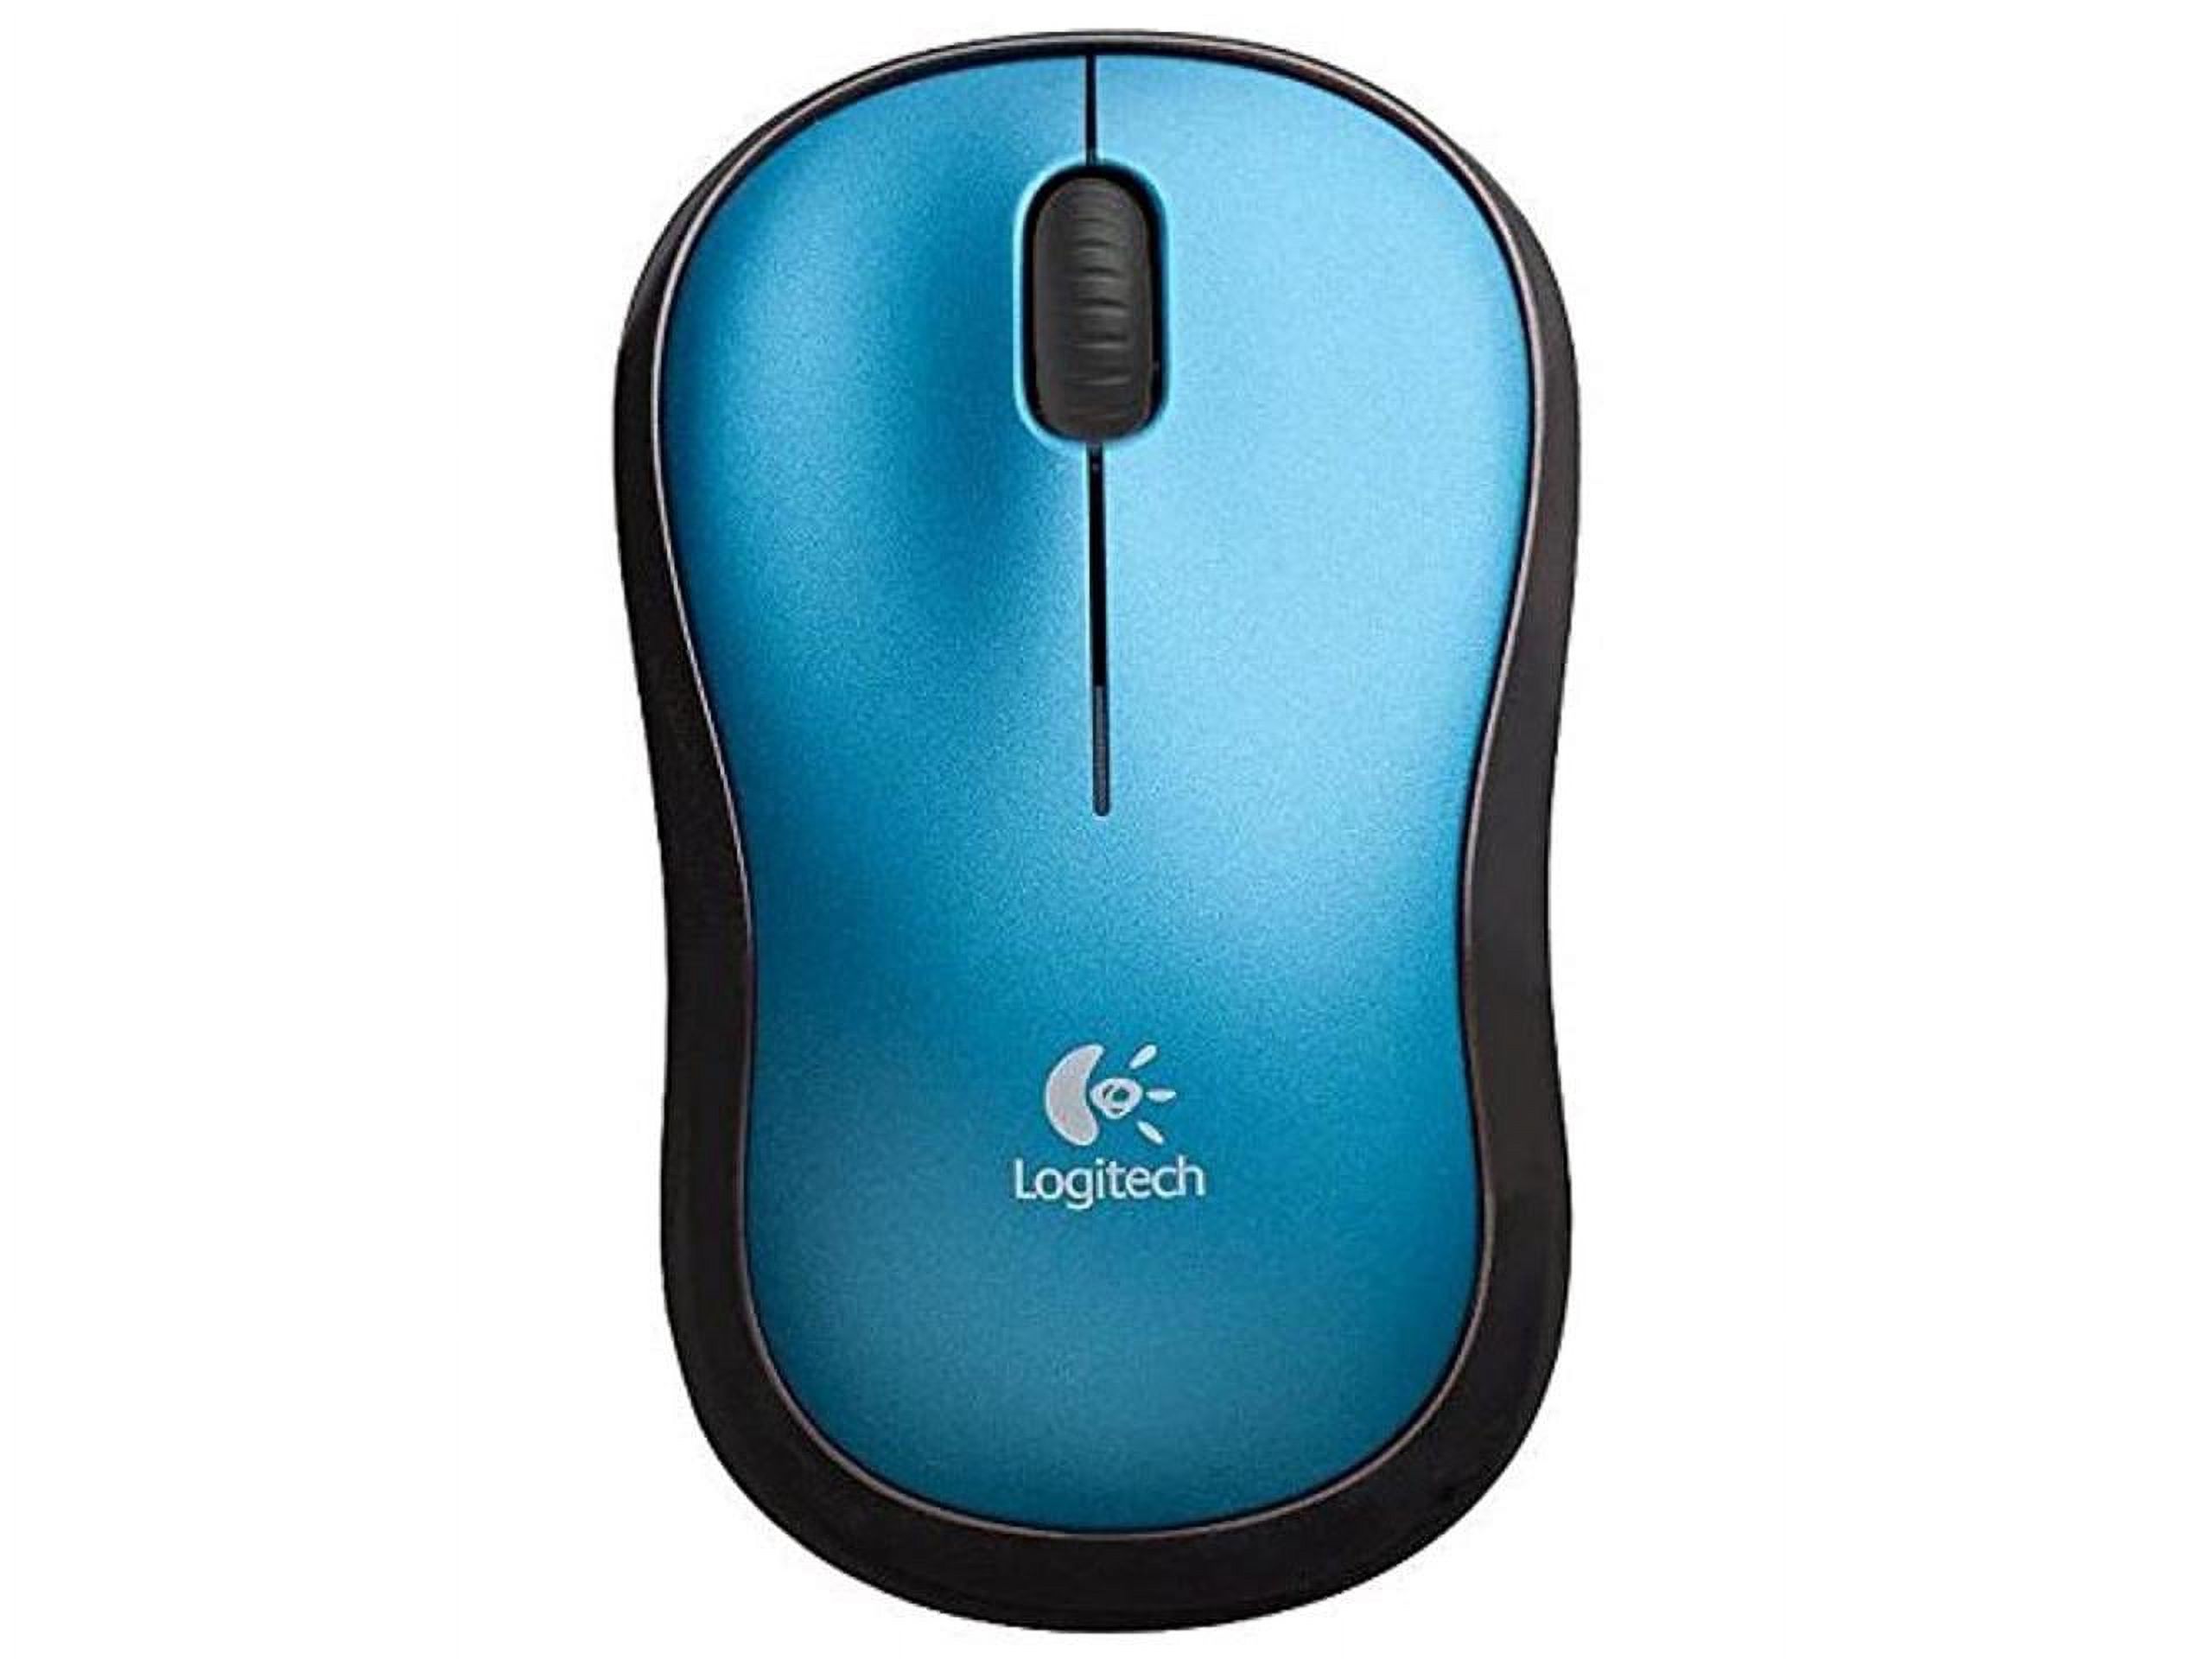 Logitech M185 Wireless Mouse, 2.4GHz with USB Mini Receiver, Ambidextrous, Blue - image 3 of 15